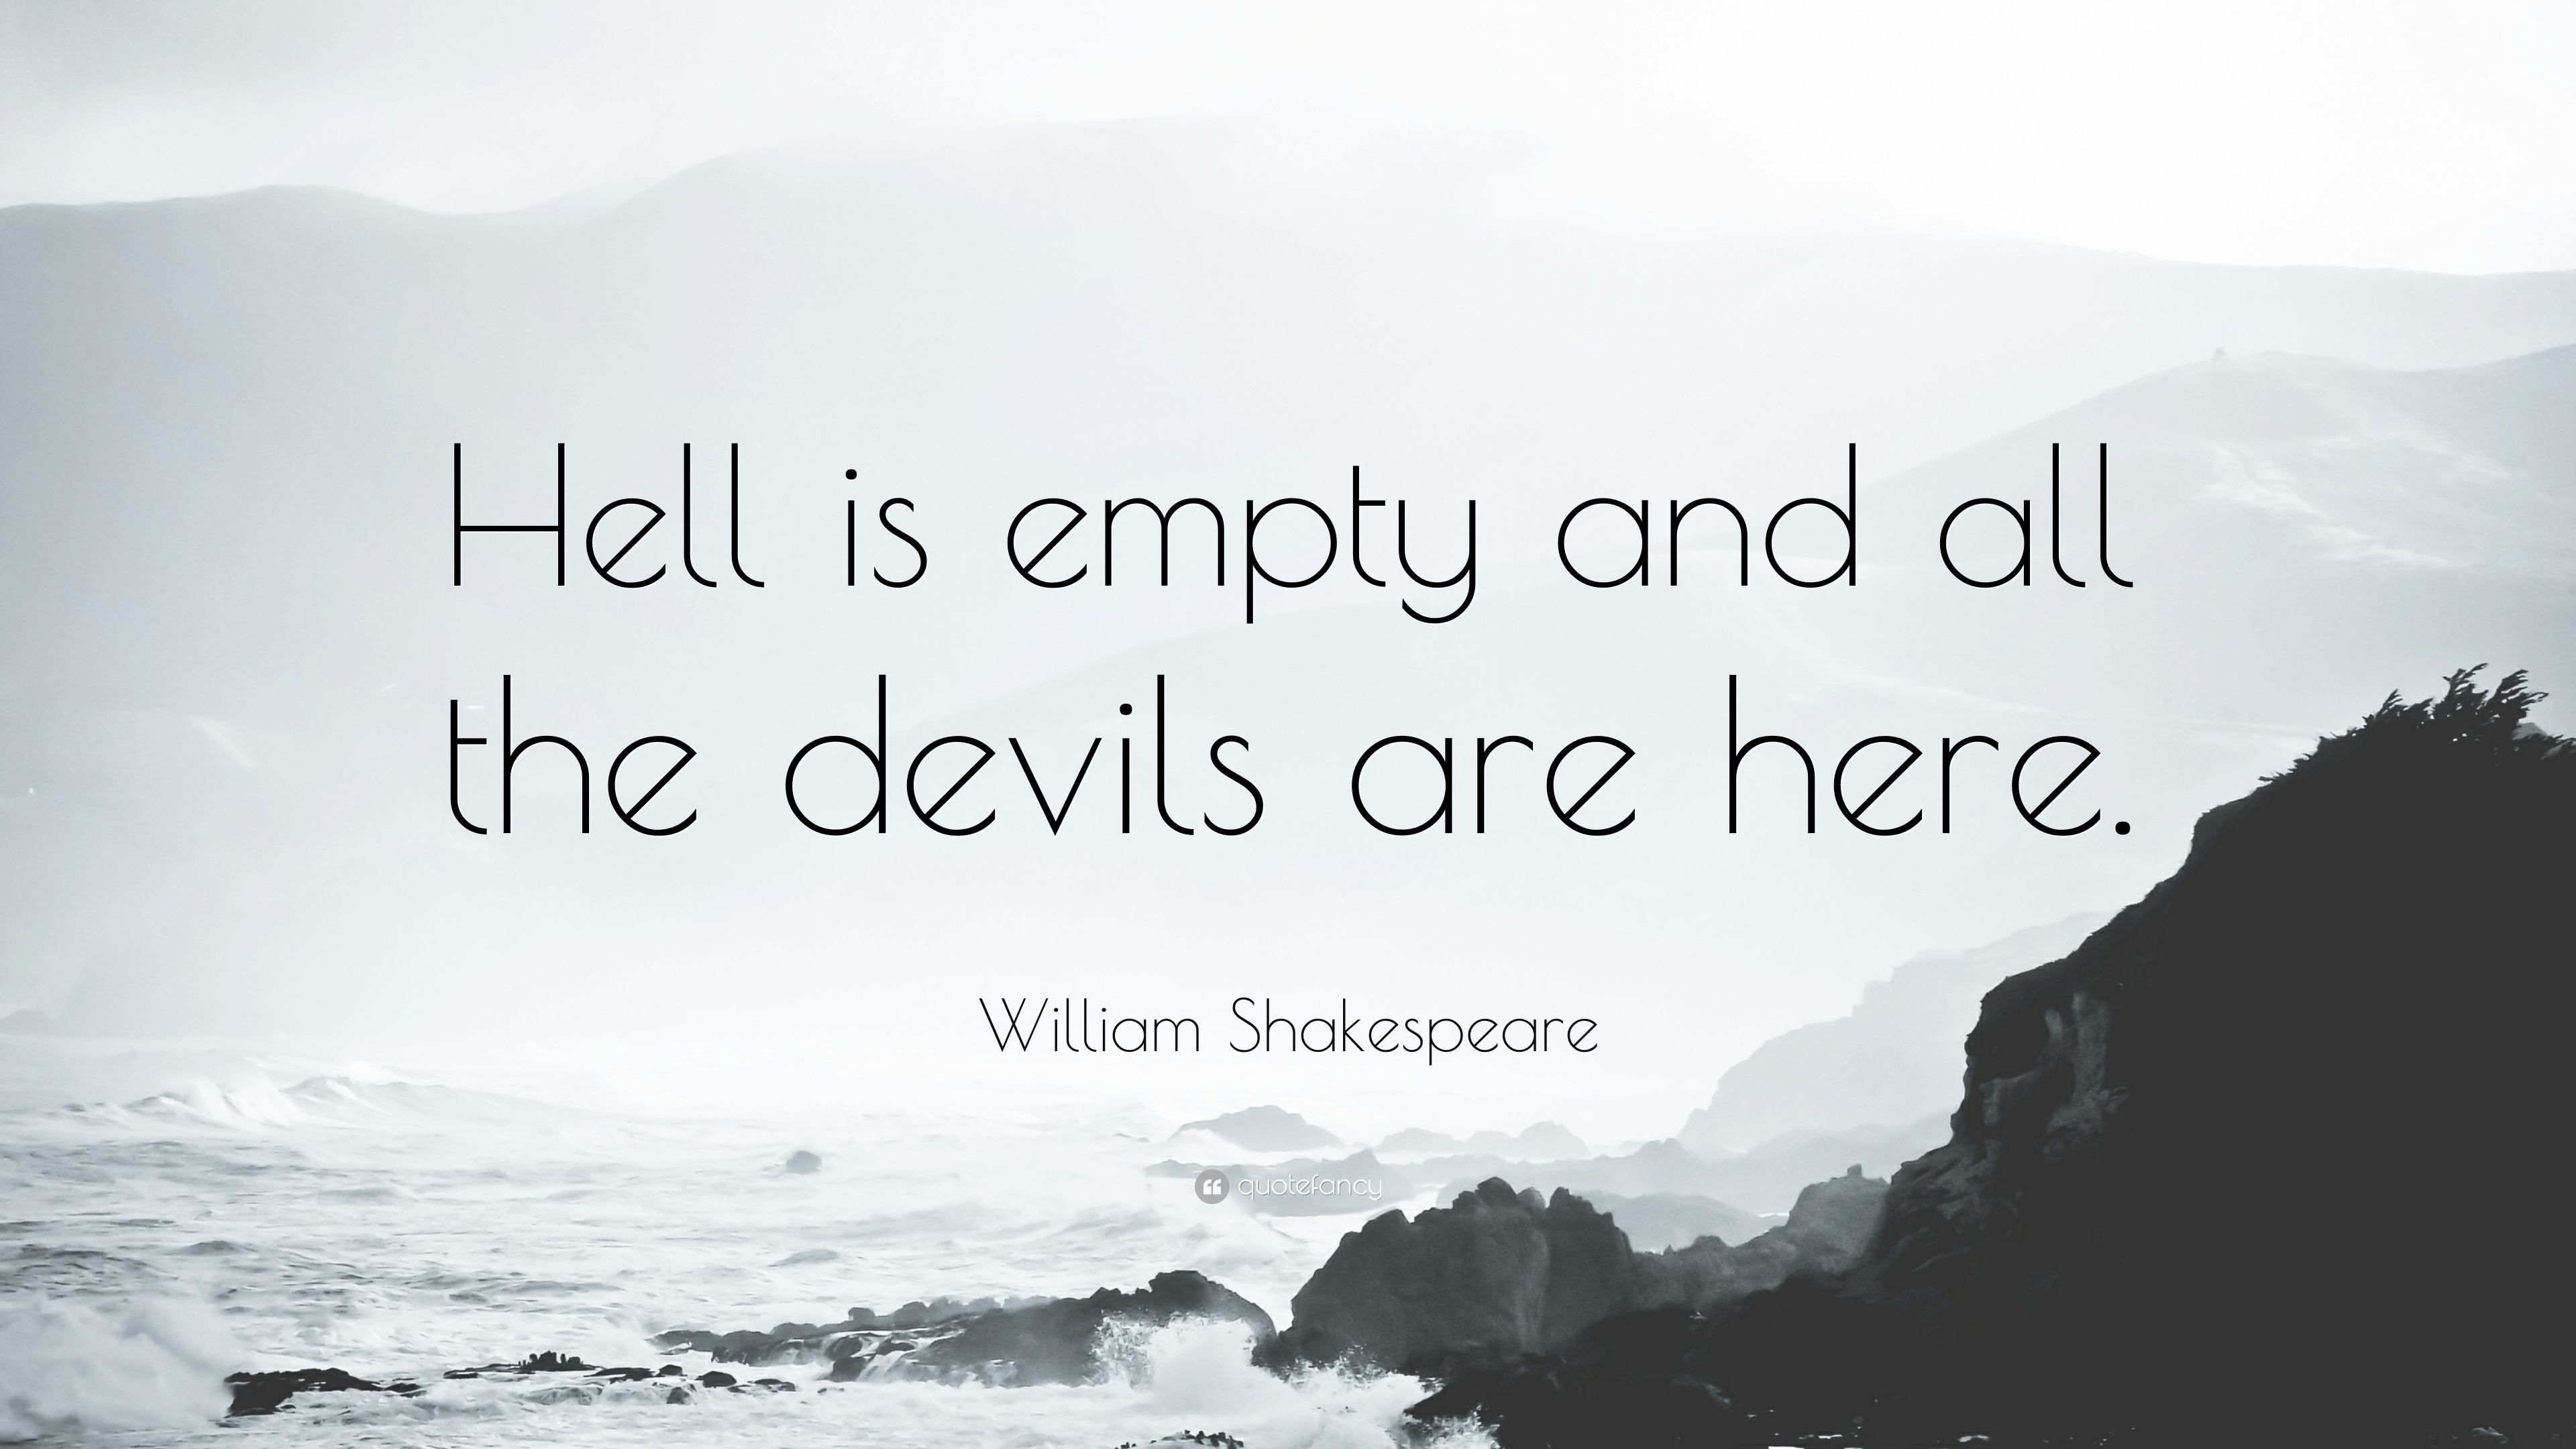 William Shakespeare Quote: “Hell is empty and all the devils are here.” (14  wallpapers) - Quotefancy